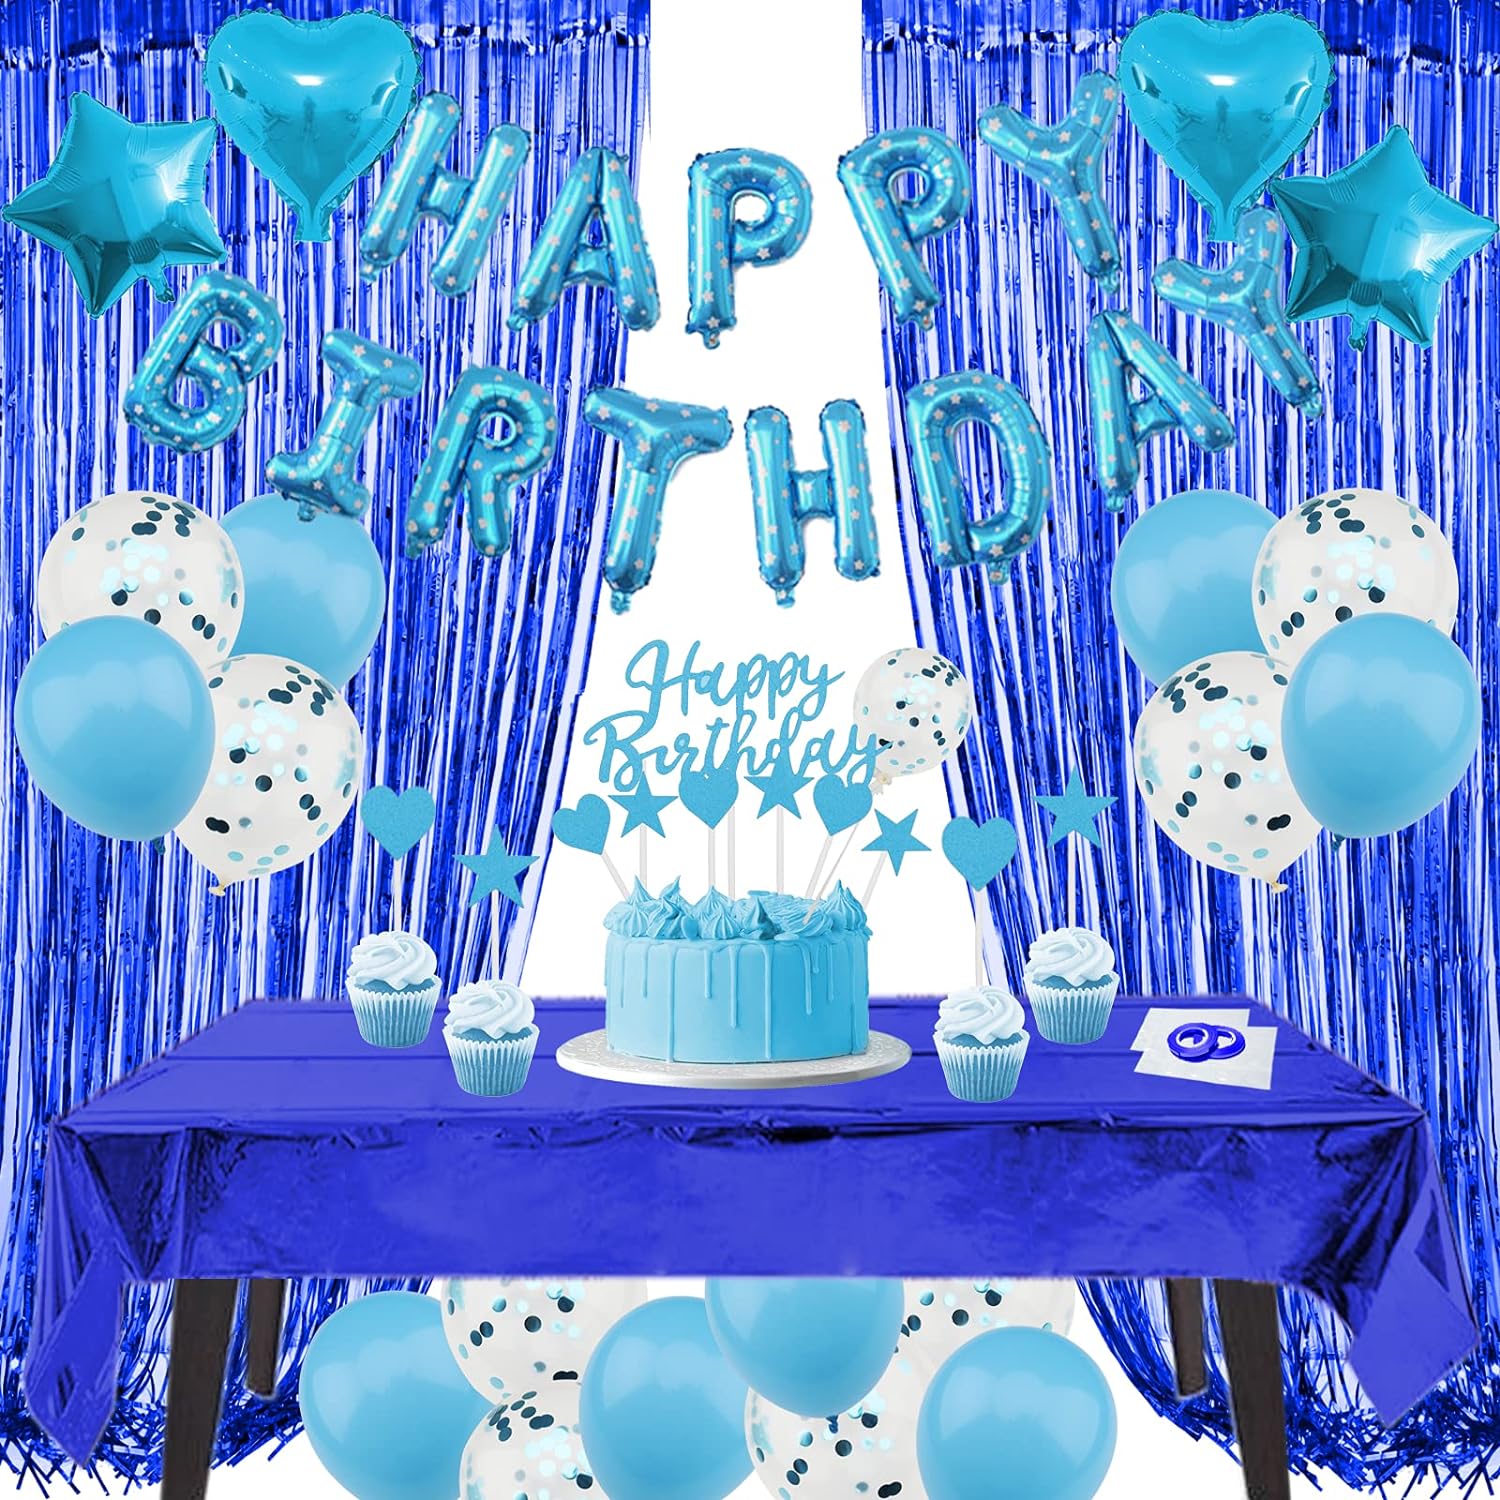 ZERODECO Birthday Decorations Blue, Foil Happy Birthday Balloon Banner Tablecloth Fringe Shiny Curtains Cake Flag Star and Heart Balloons Confetti Latex Balloons for Birthday Party